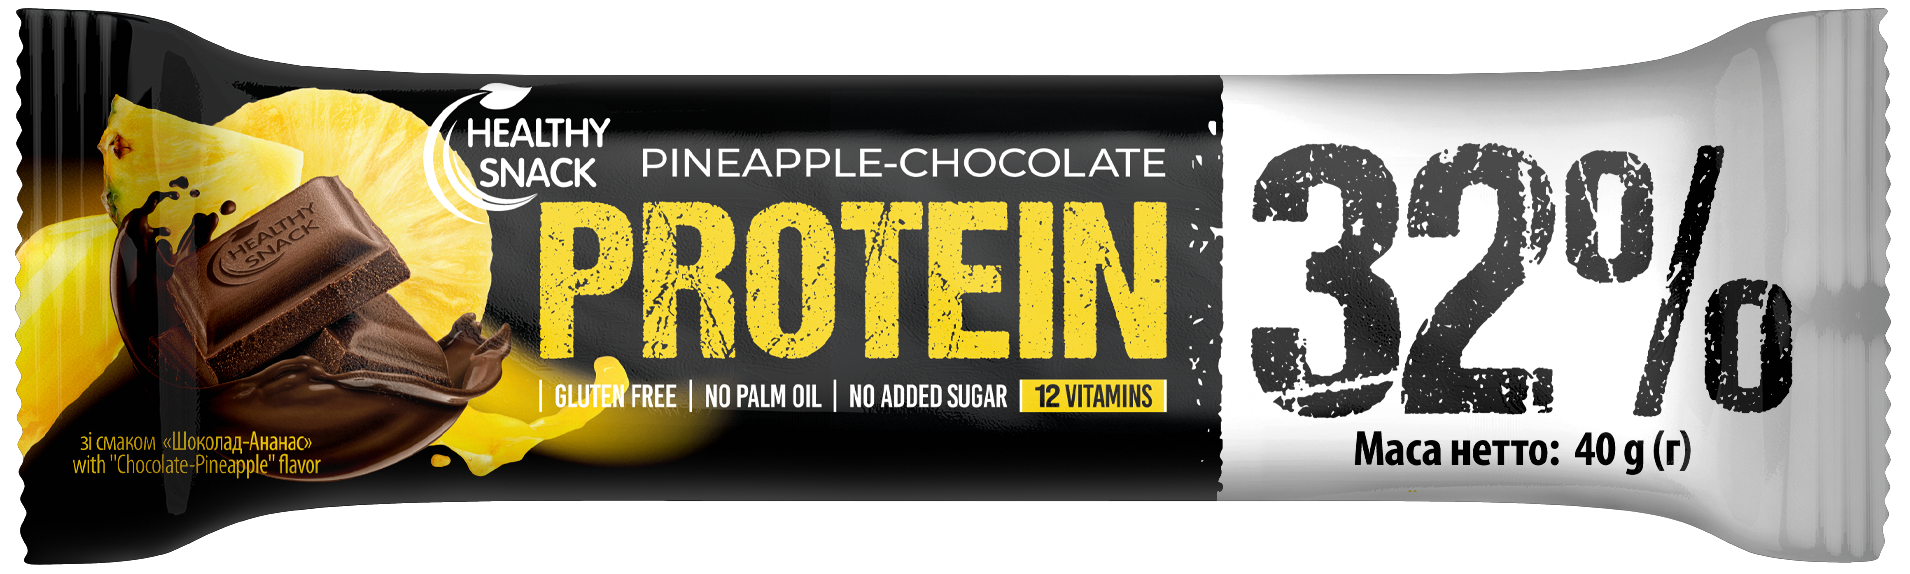 Chocolate-Pineapple flavored protein bar for sports nutrition, glazed